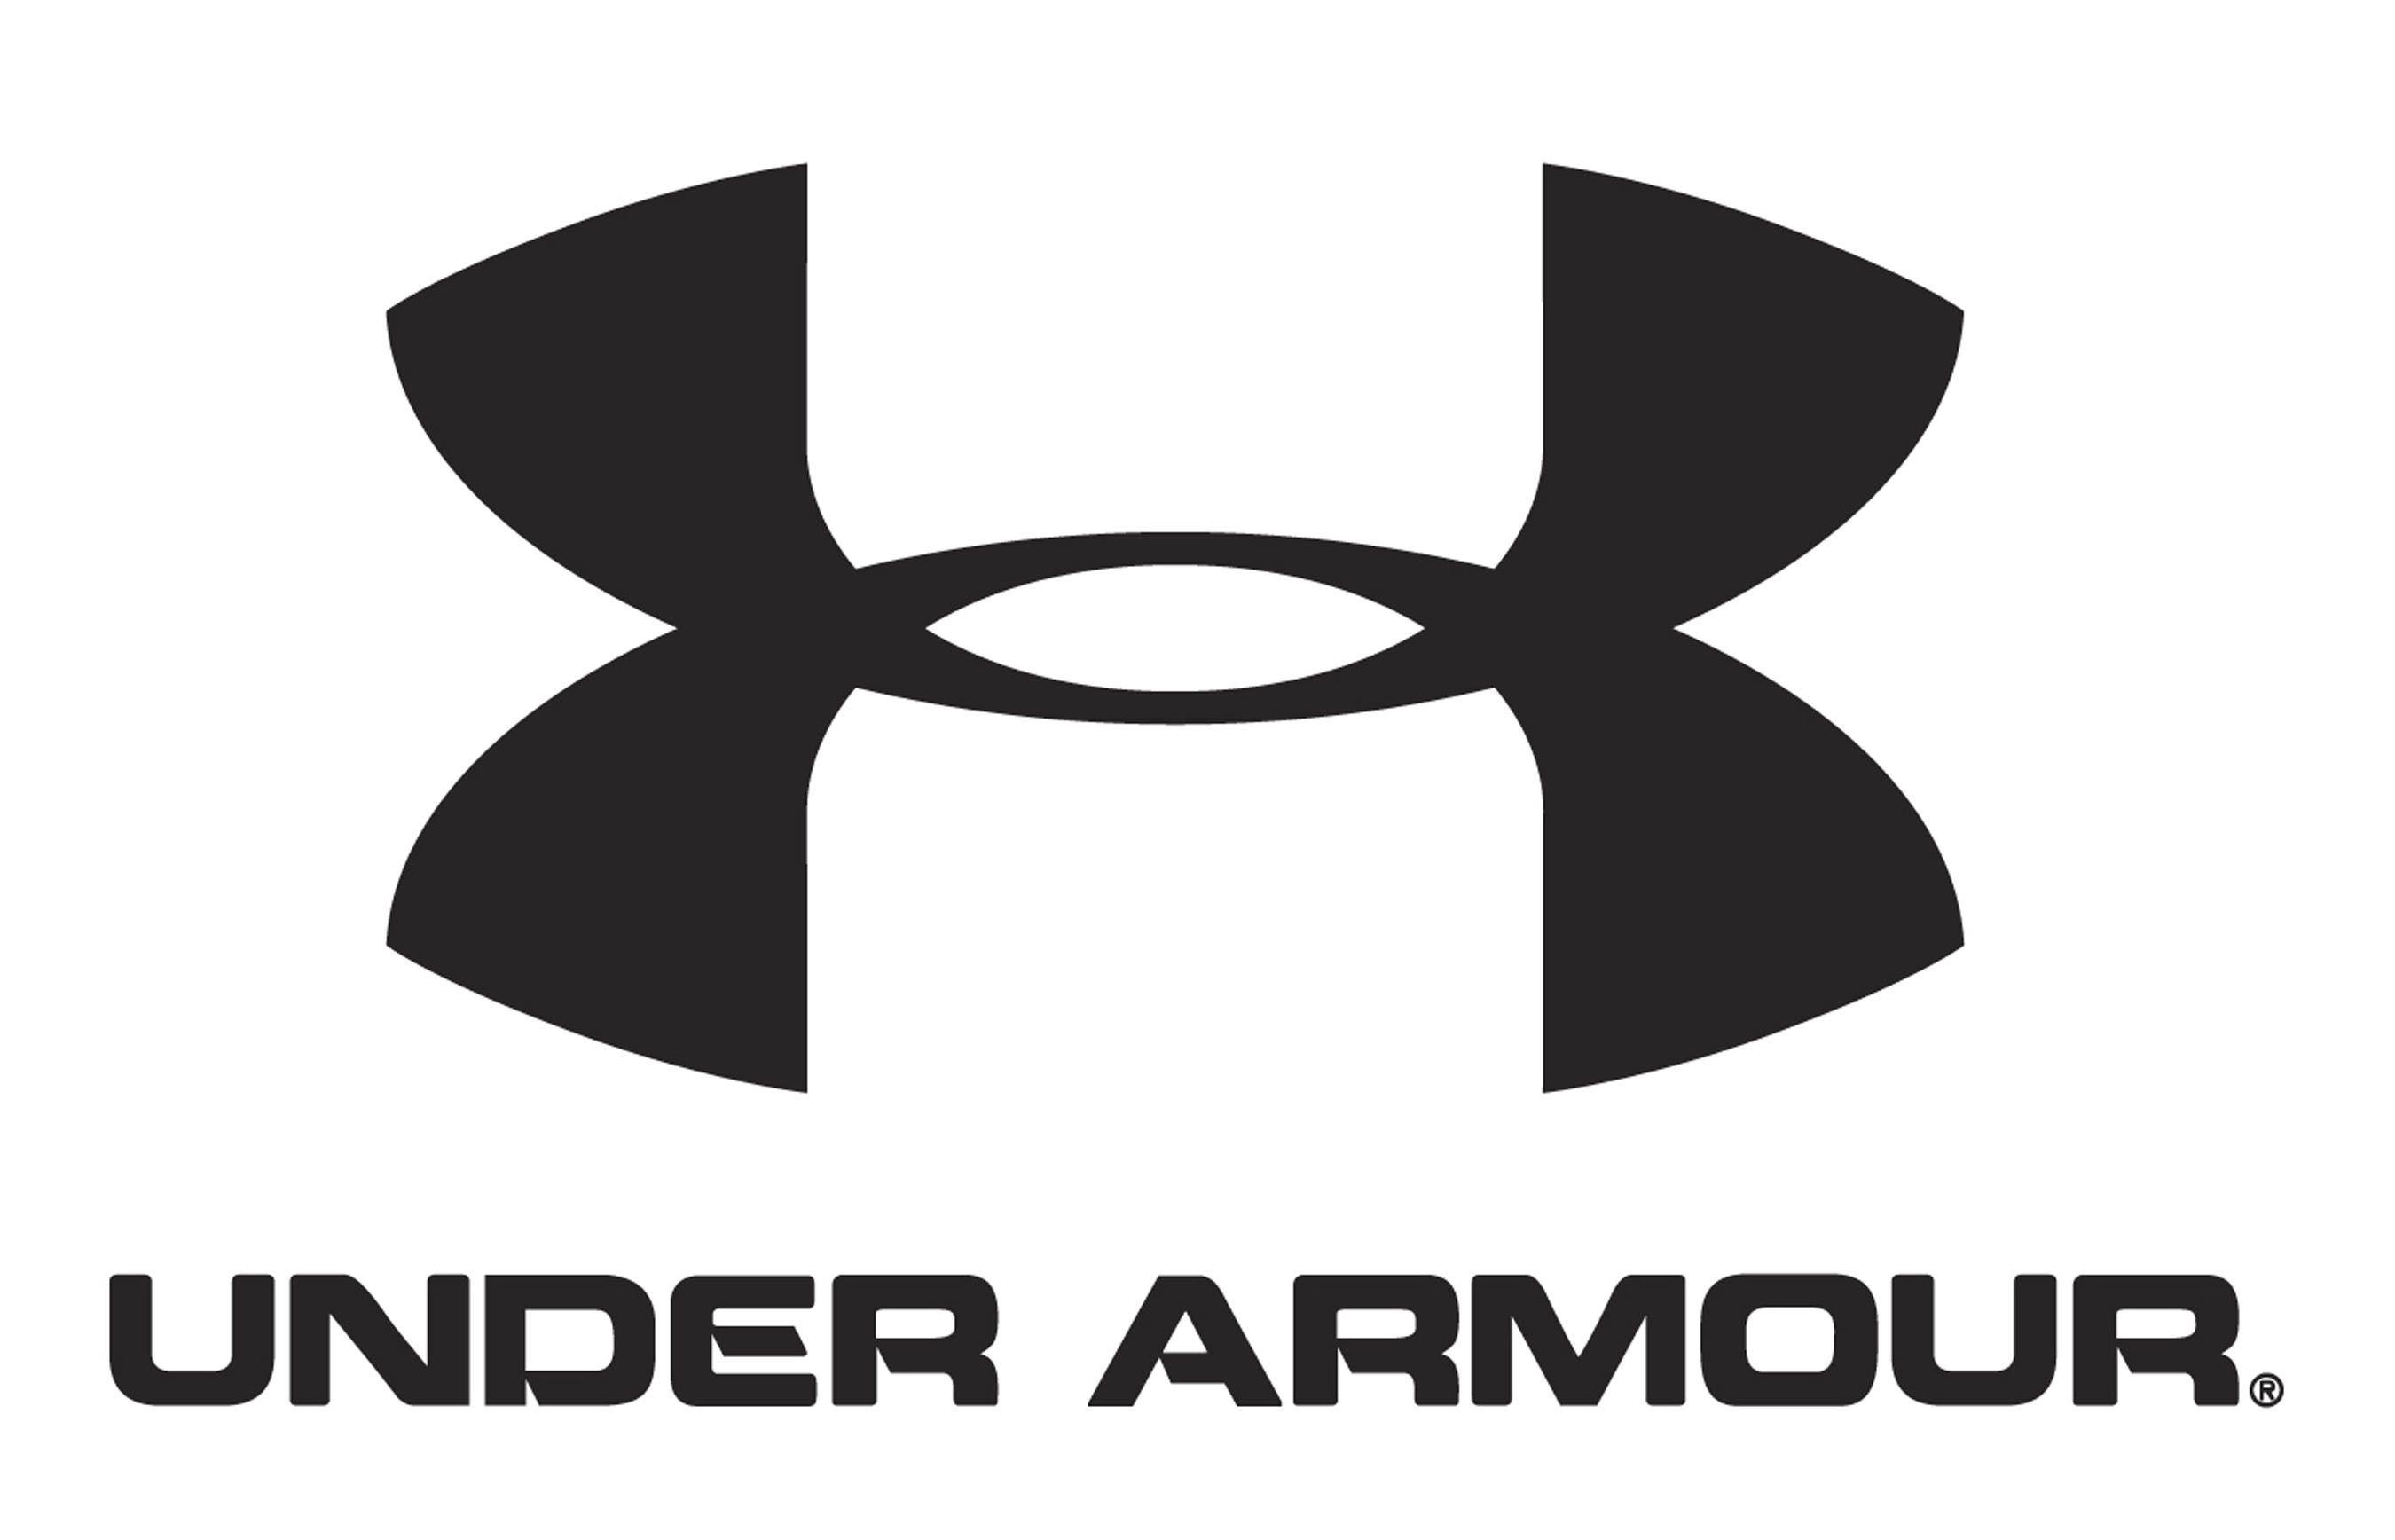 Steph Curry Logo - Under Armour Debuts Stephen Curry's First Signature Shoe